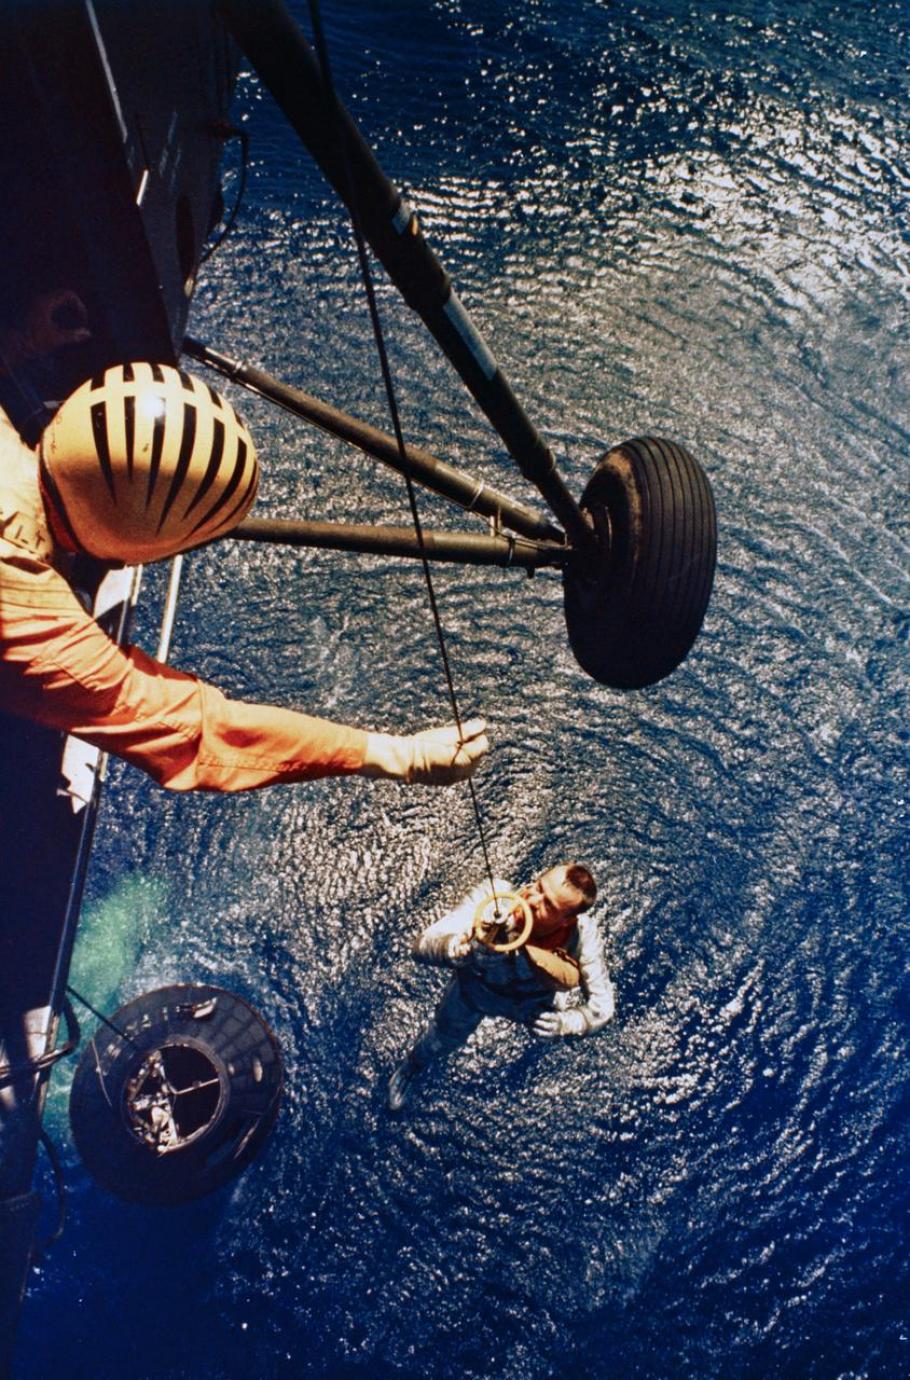 Alan Shepard picked-up Marine helicopter after sub-orbital flight